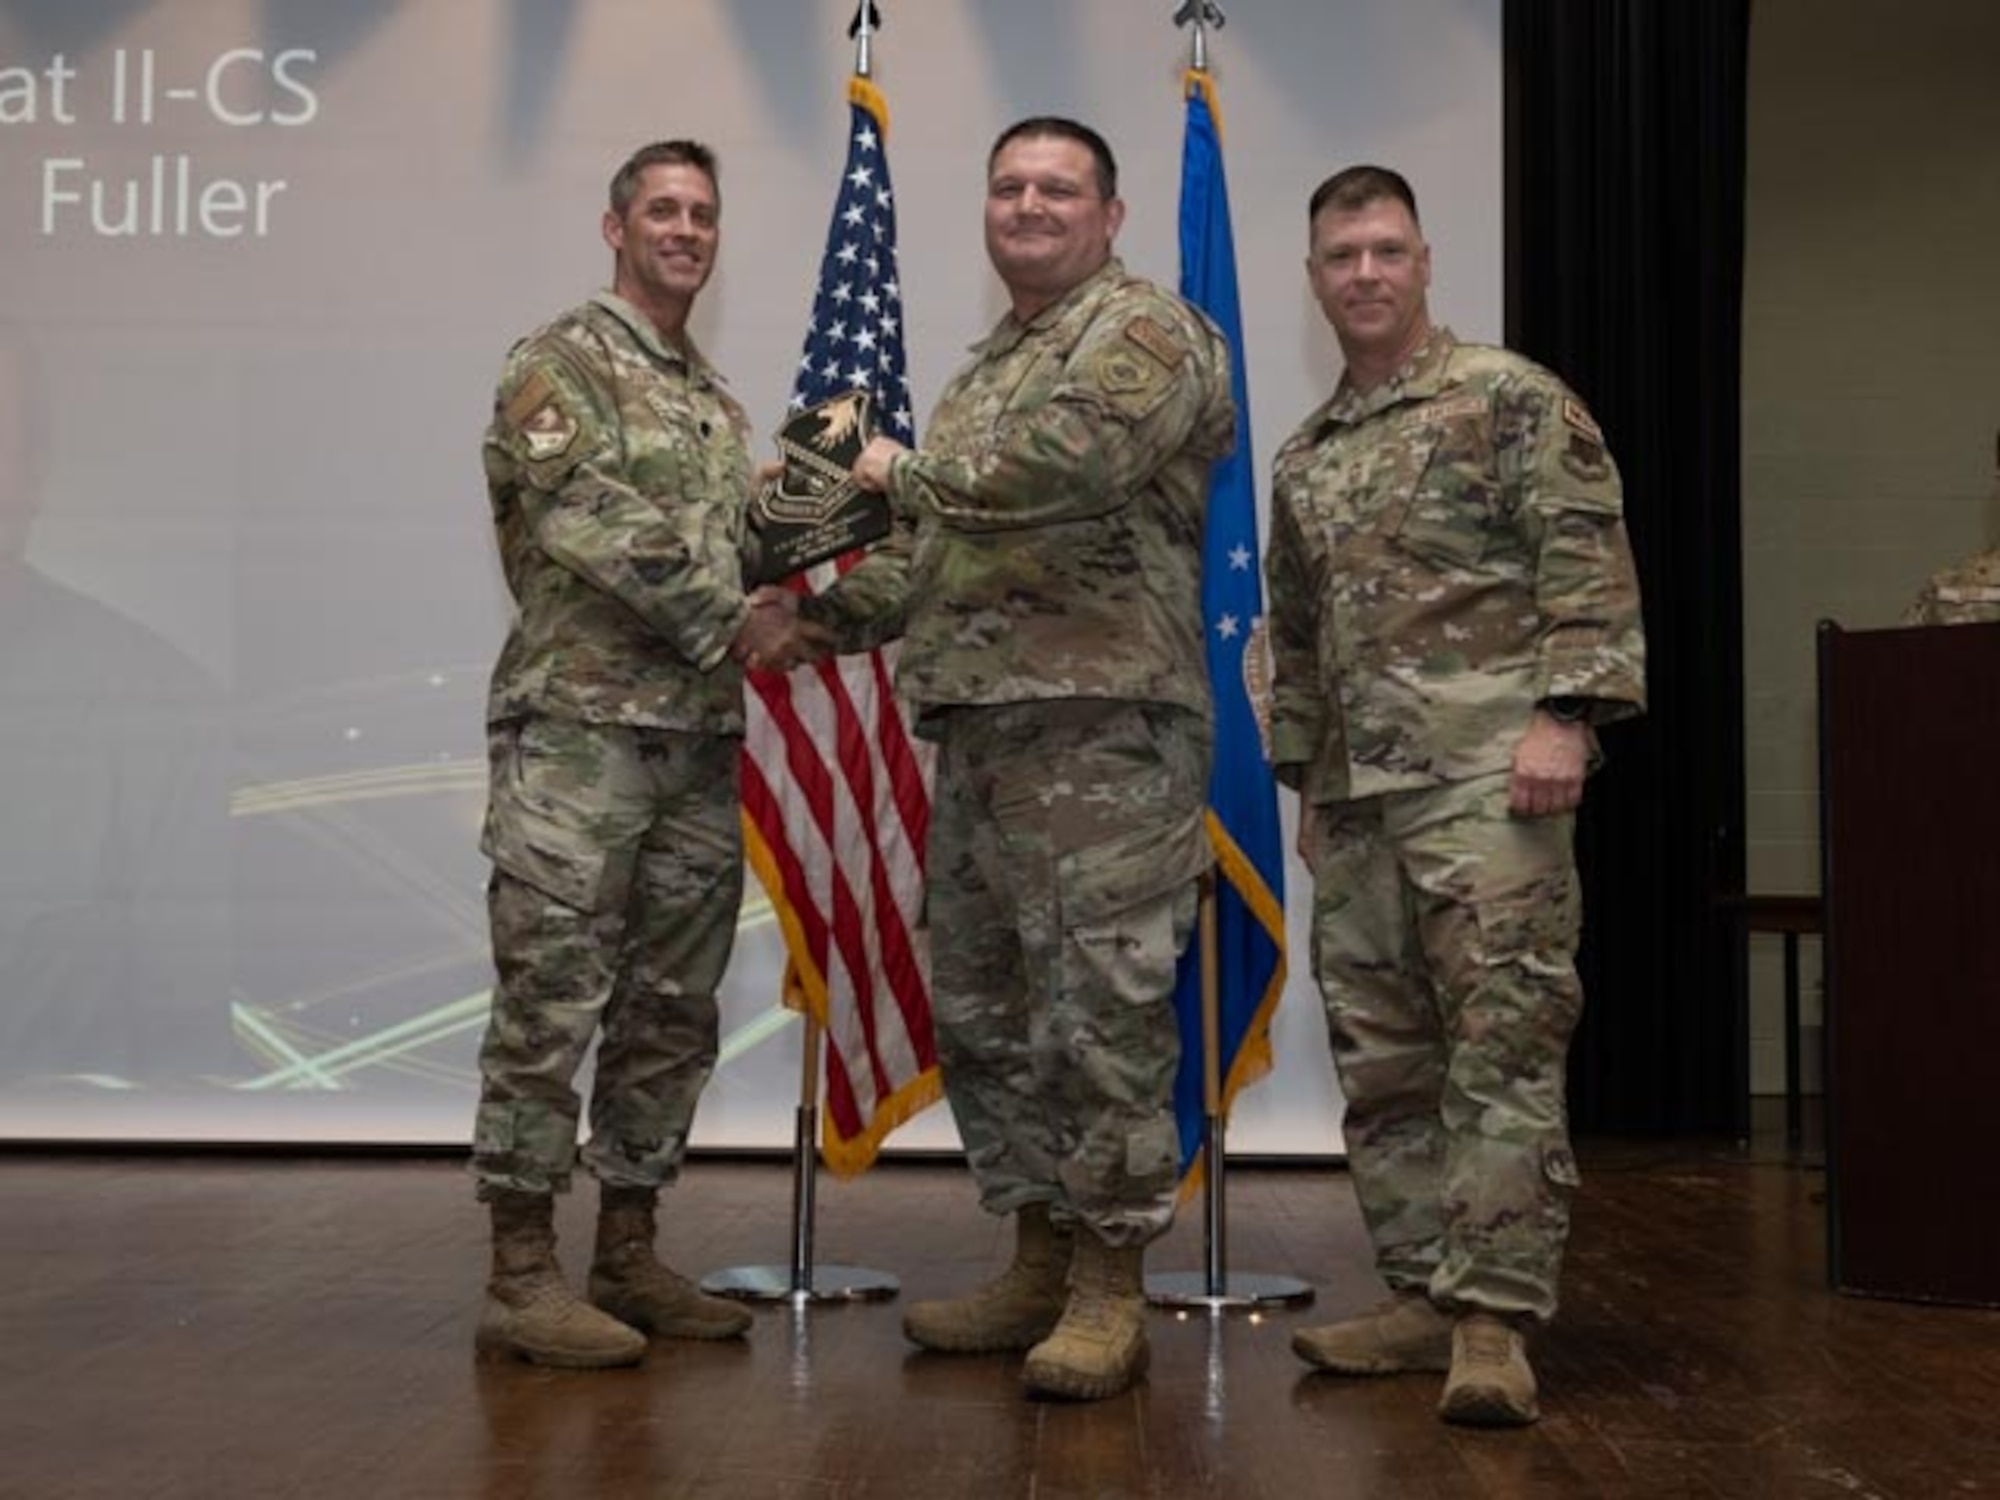 U.S. Air Force Lt. Col. James Melvin, left, Mission Support Group deputy commander, and Chief Master Sgt. Edward Mueller, right, Mission Support Group senior enlisted leader, Tech. Sgt. Robert Nobriga, center, who accepts the award on behalf of Mr. David Fuller, resource advisor, Civilian Category Two of the First Quarter Award at Seymour Johnson Air Force Base, North Carolina, April 19, 2024. The ceremony recognized 10 individual award winners and one team for outstanding performance. (U.S. Air Force photo by Airman Megan Cusmano